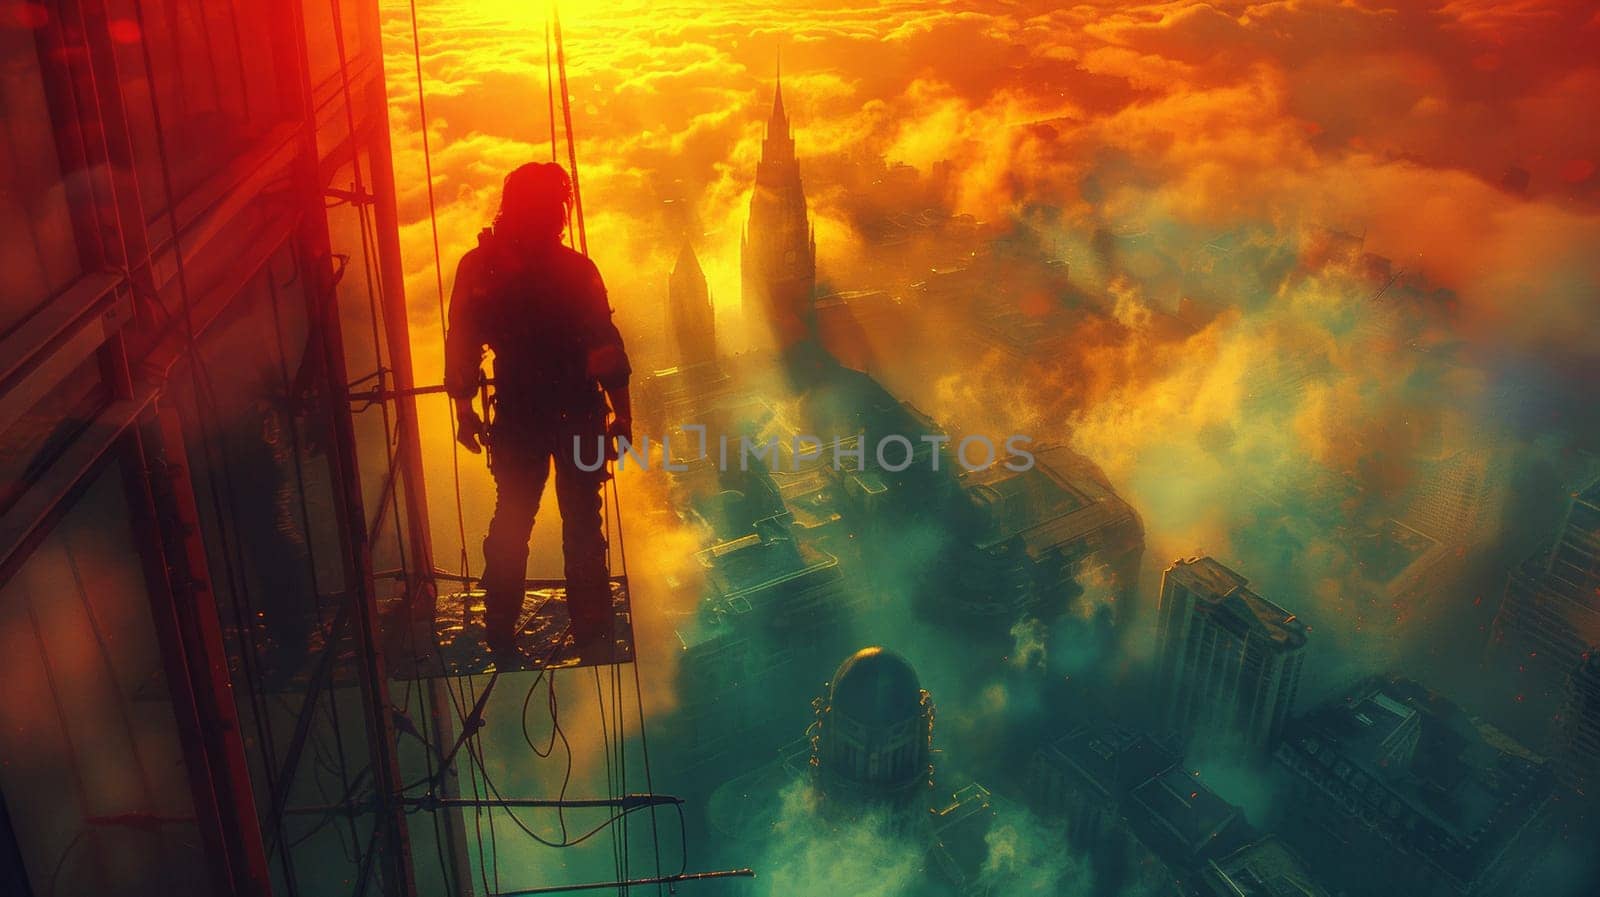 A man standing on a ledge looking out over the city